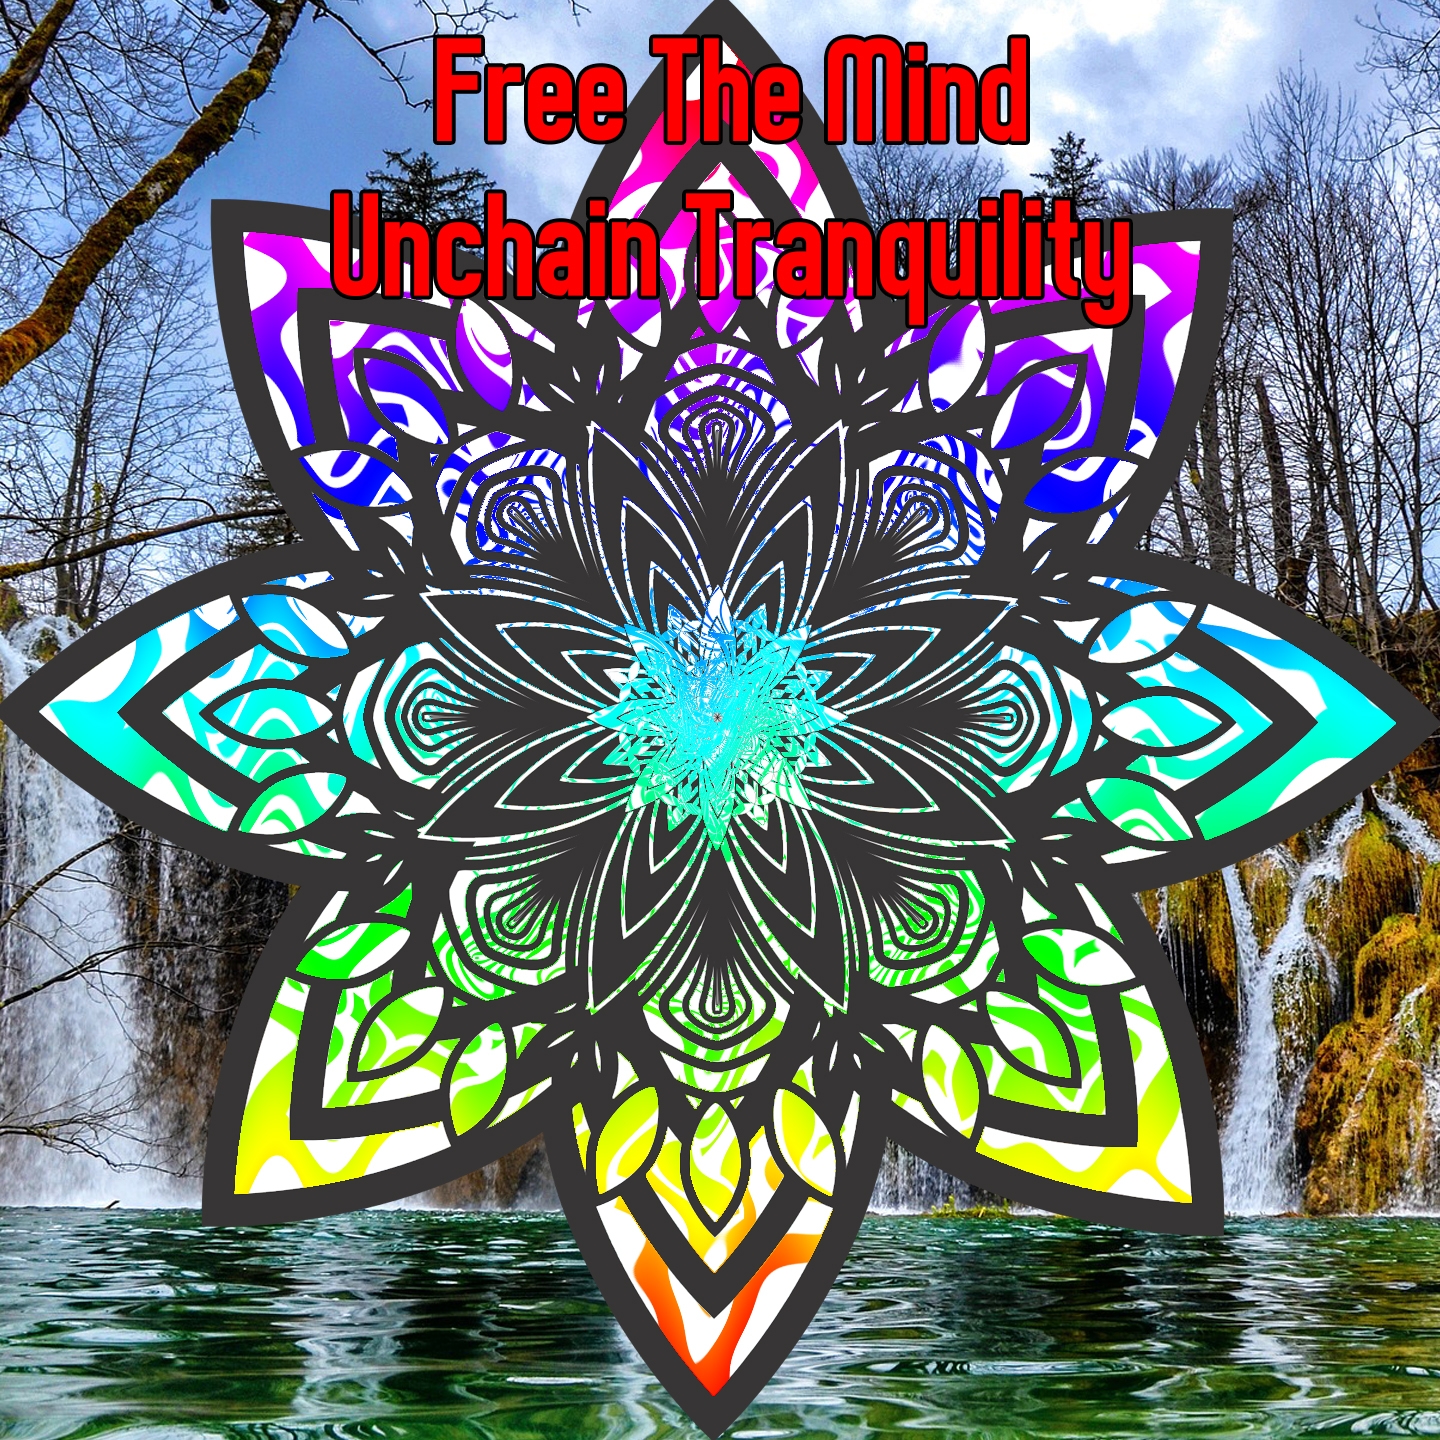 Free The Mind Unchain Tranquility